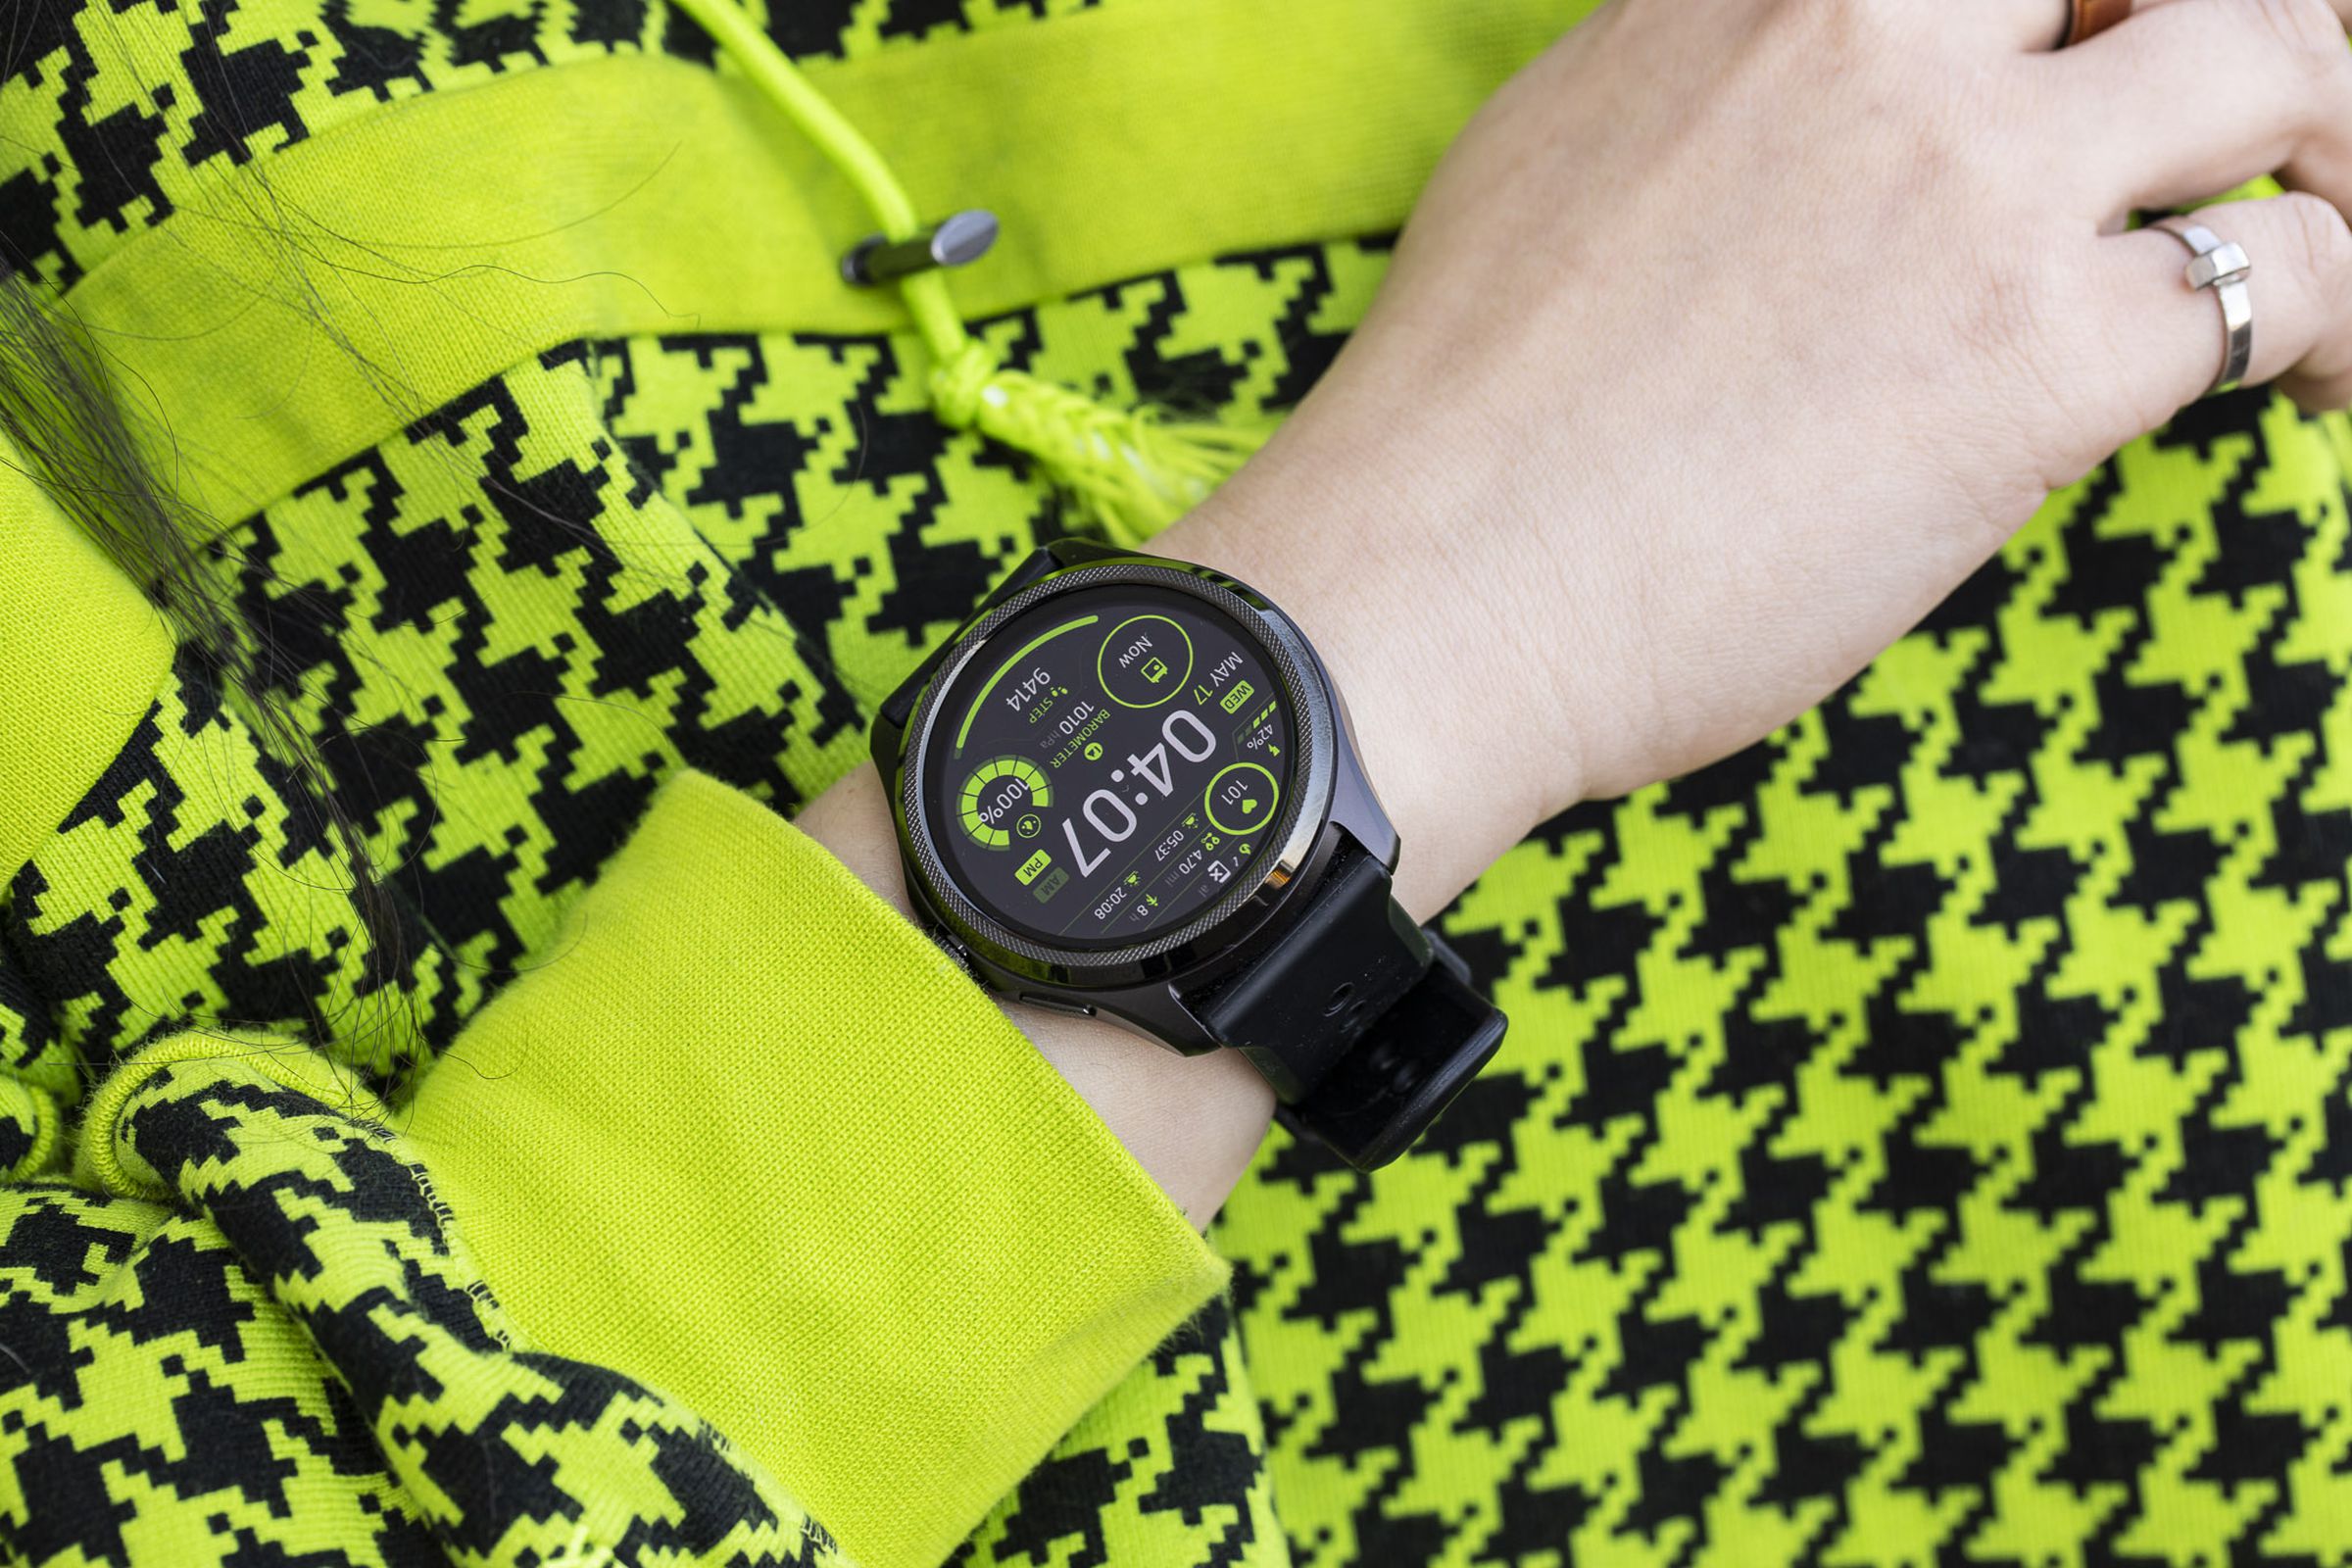 Close-up of the Mobvoi TicWatch Pro 5 on a wrist against a lime green / black sweater with a houndstooth pattern.